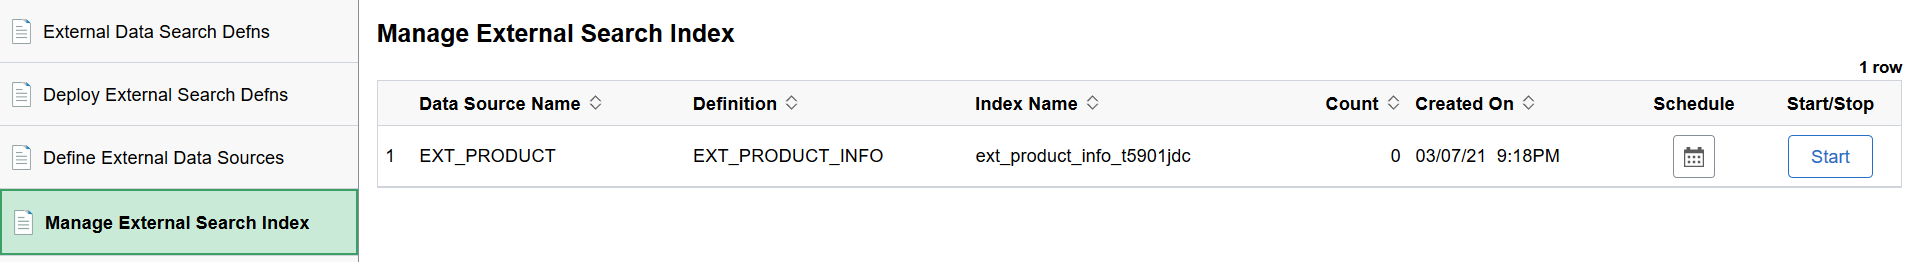 Manage External Search Index